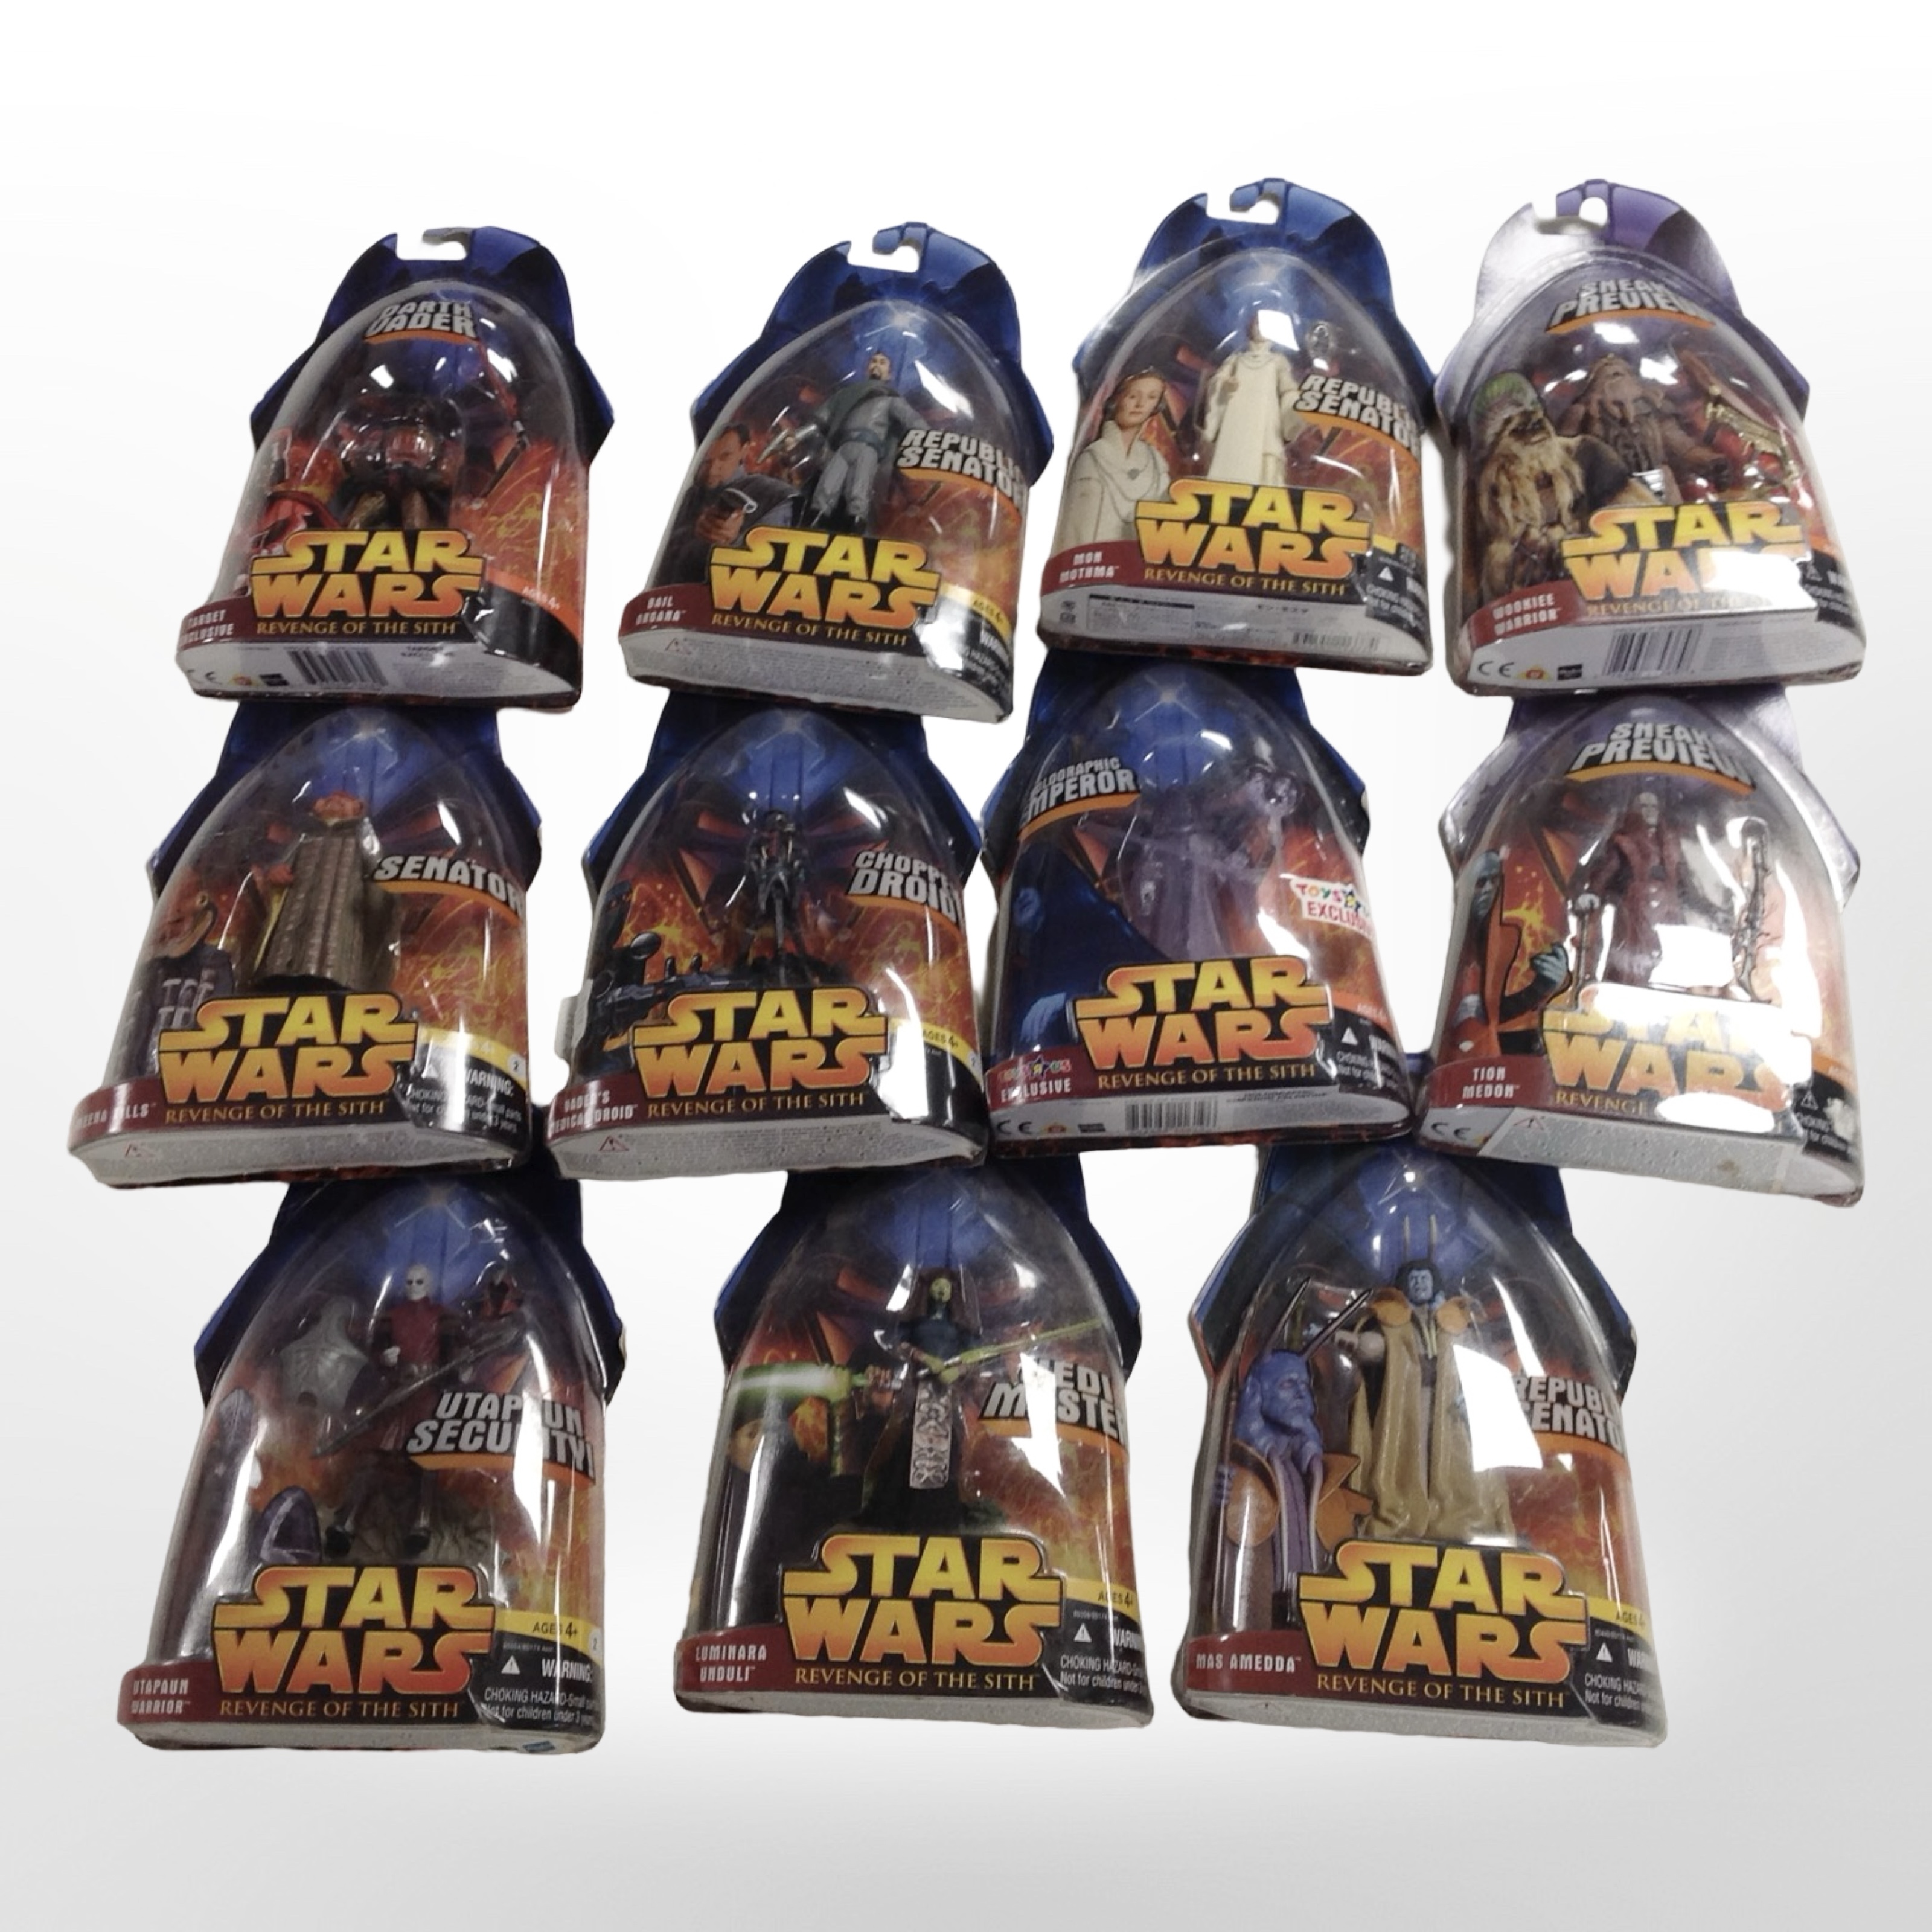 11 Hasbro Star Wars Revenge of the Sith figurines, boxed.